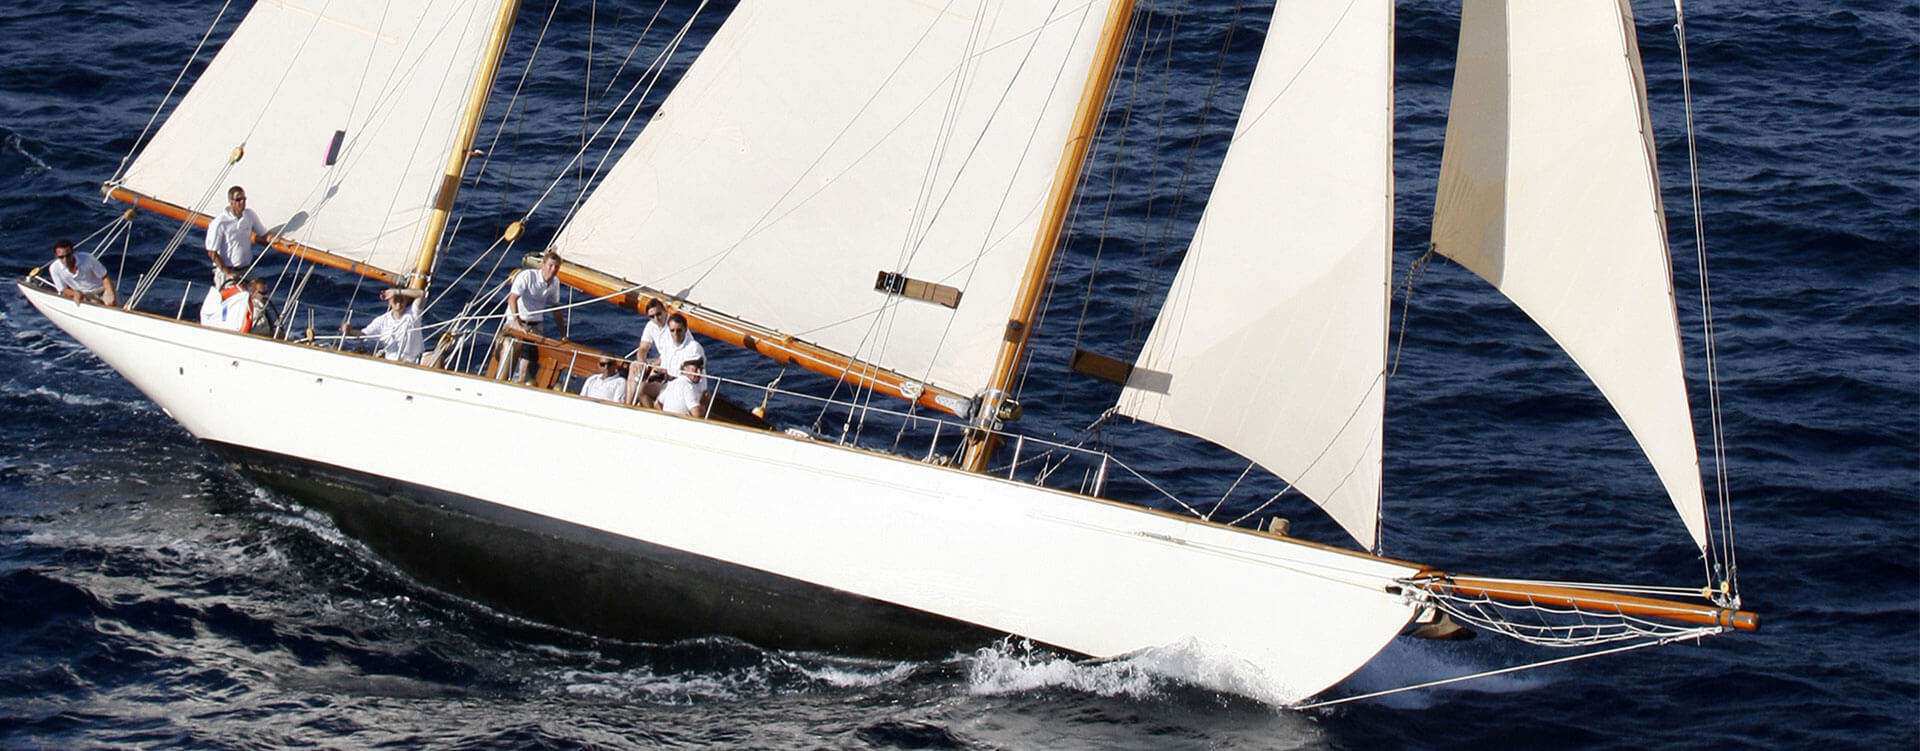 Talisman 19 An Exceptionally Beautiful Classic Sailing Yacht